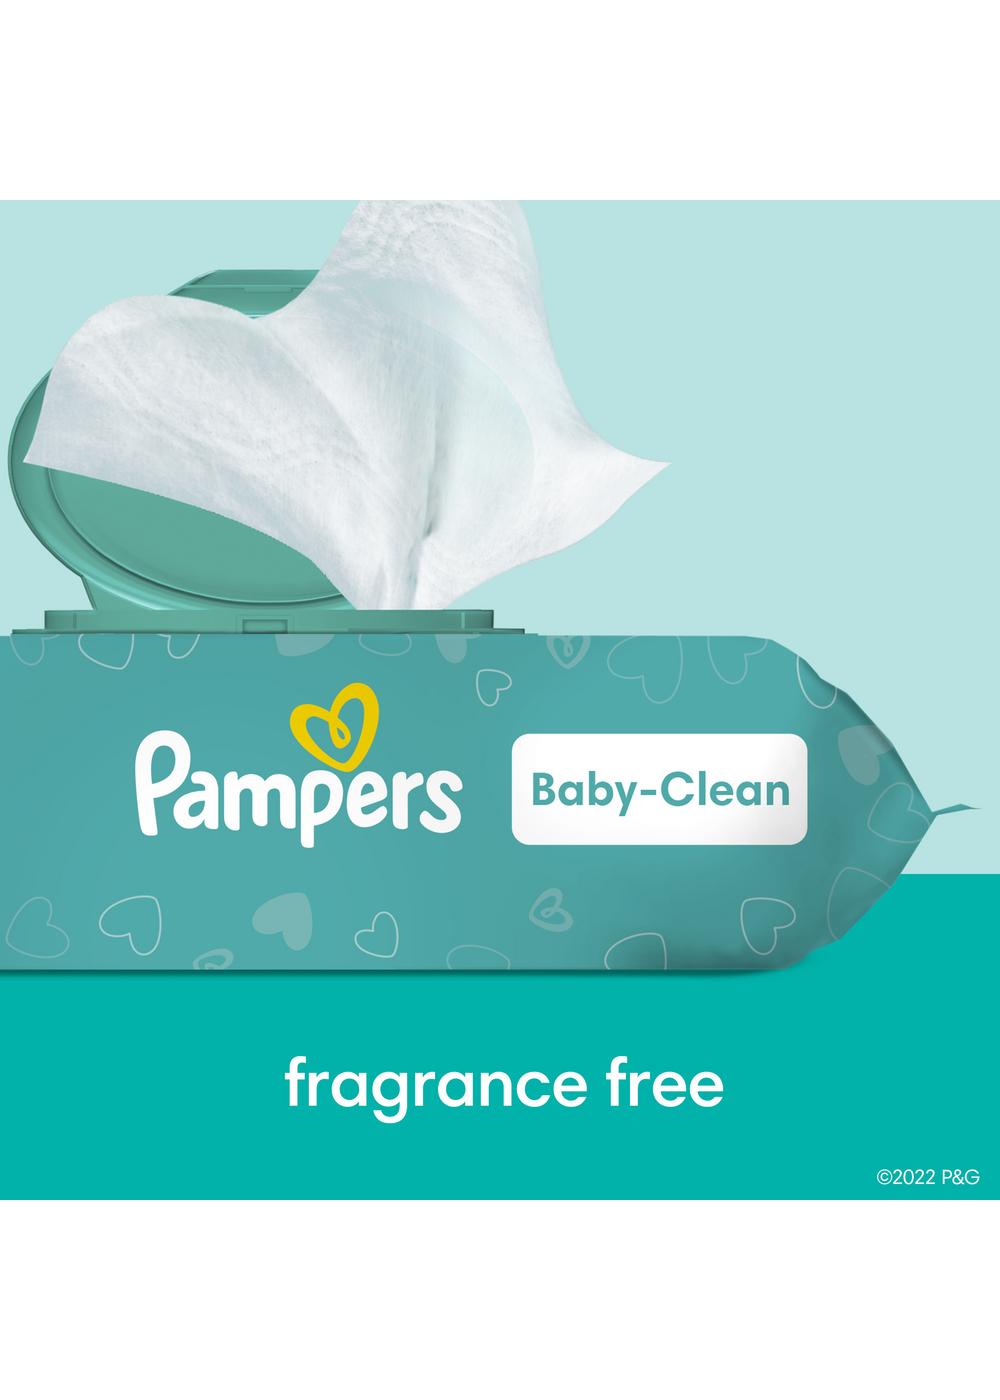 Pampers Baby Wipes - Fragrance Free; image 5 of 10